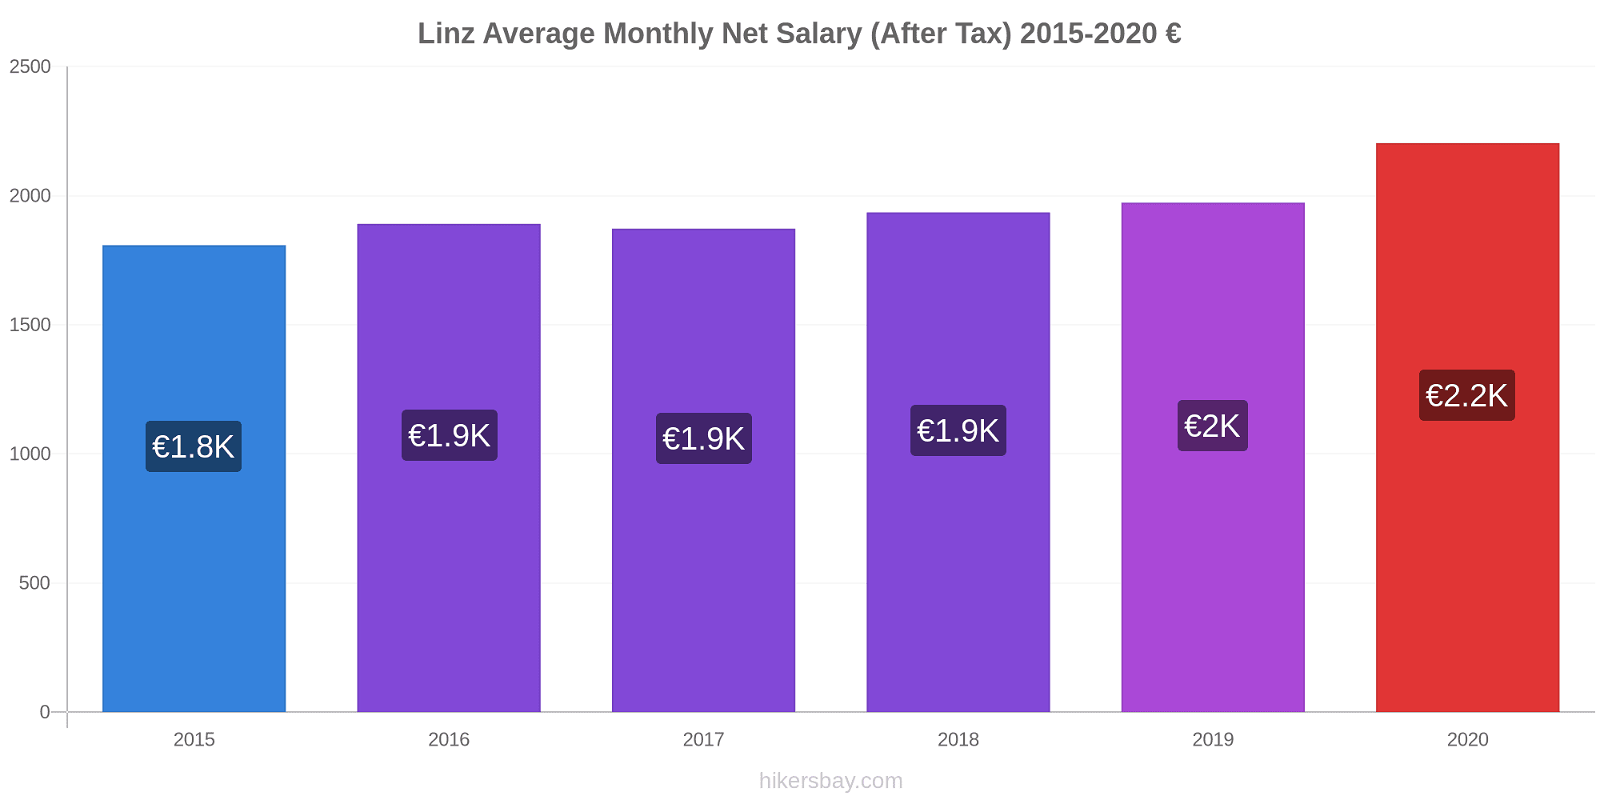 Linz price changes Average Monthly Net Salary (After Tax) hikersbay.com